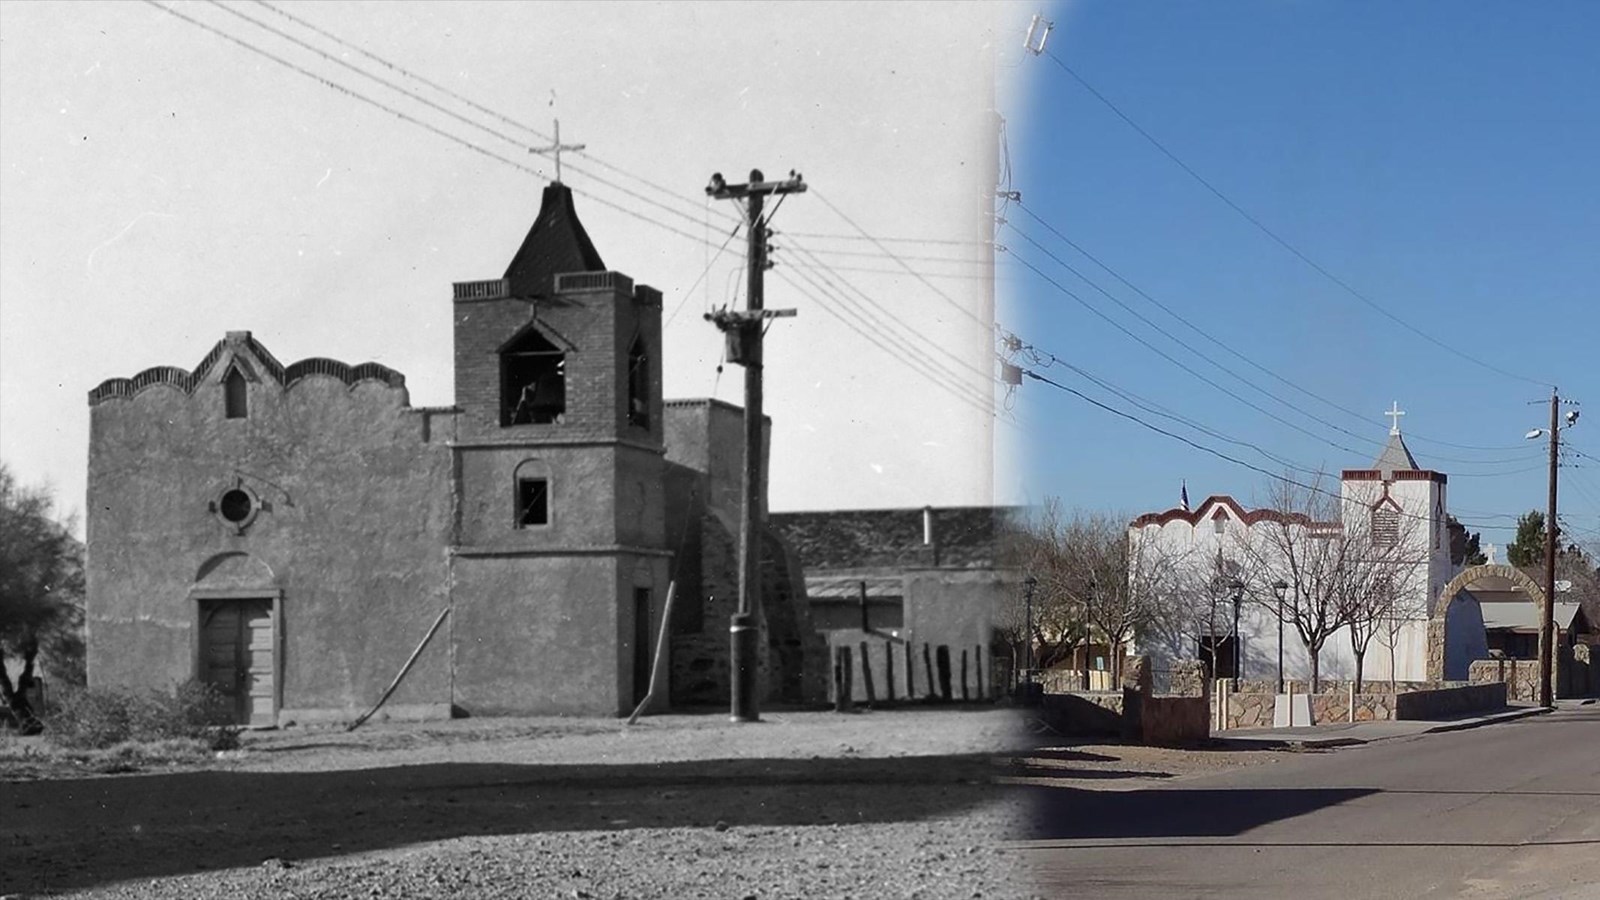 A historic image of an old adobe church next to a current image